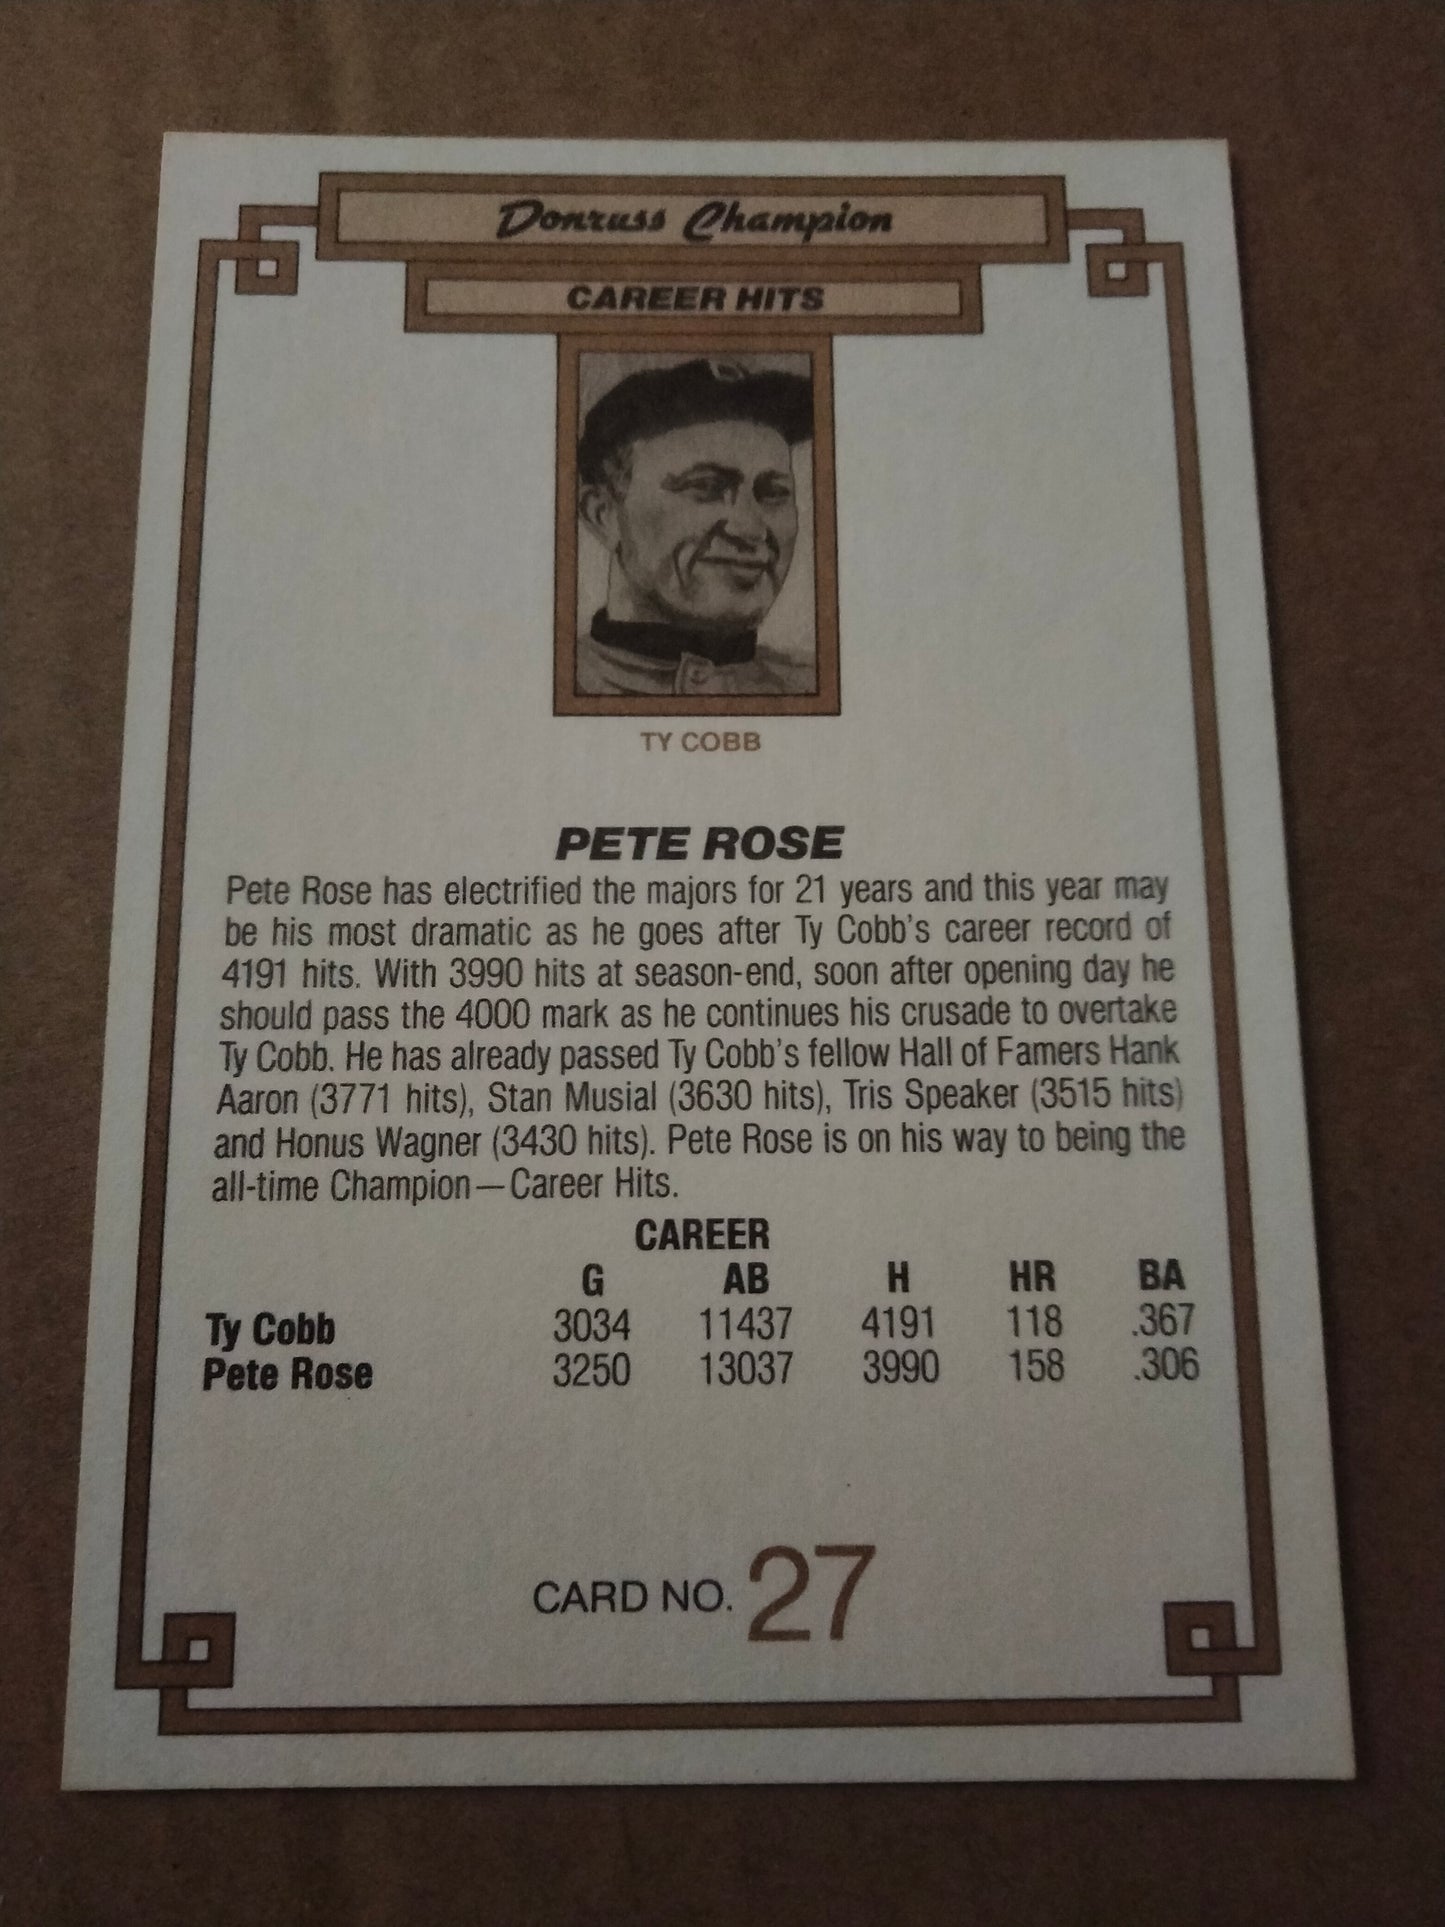 1984 Donruss Pete Rose Champion 3.5" x 5" Enlarged Players Card #27 Phillies